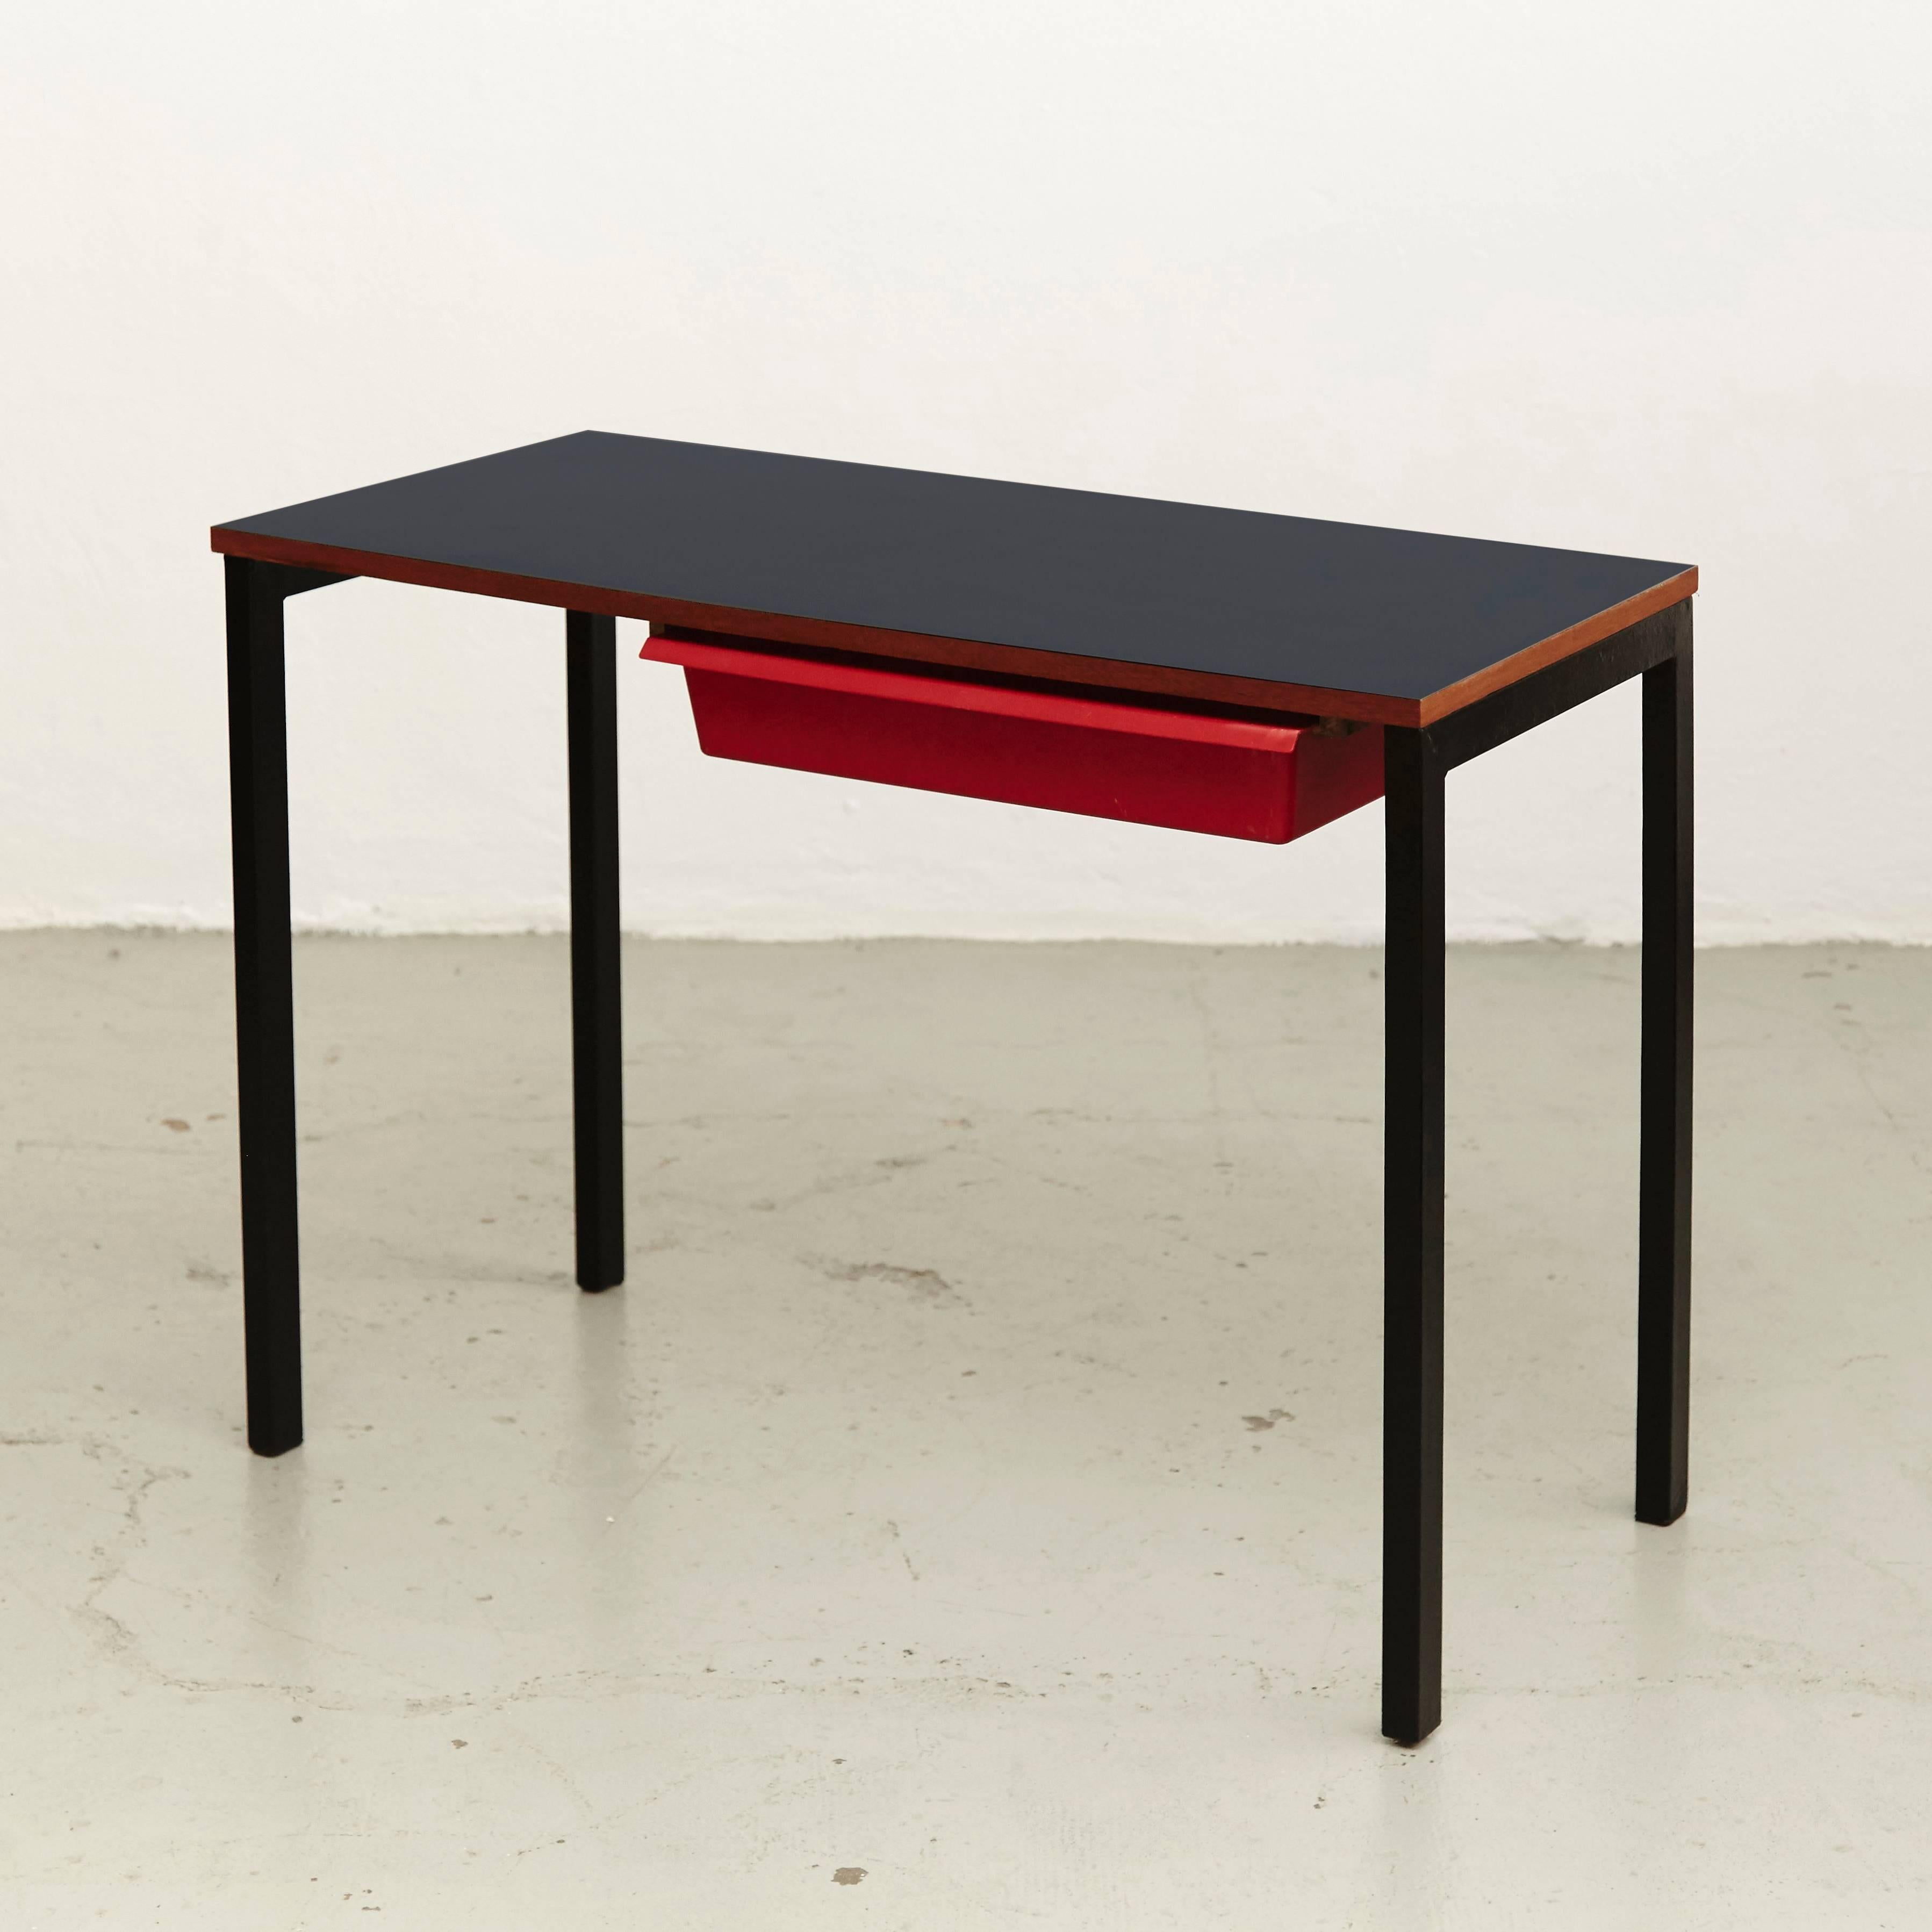 Console with drawer designed by Charlotte Perriand, circa 1958.
Manufactured in France, circa 1958.
Laminated plastic-covered plywood, painted steel and red moulded plastic.

Drawer moulded with MODELE CHARLOTTE PERRIAND/BREVETE S.G.D.G. 

In